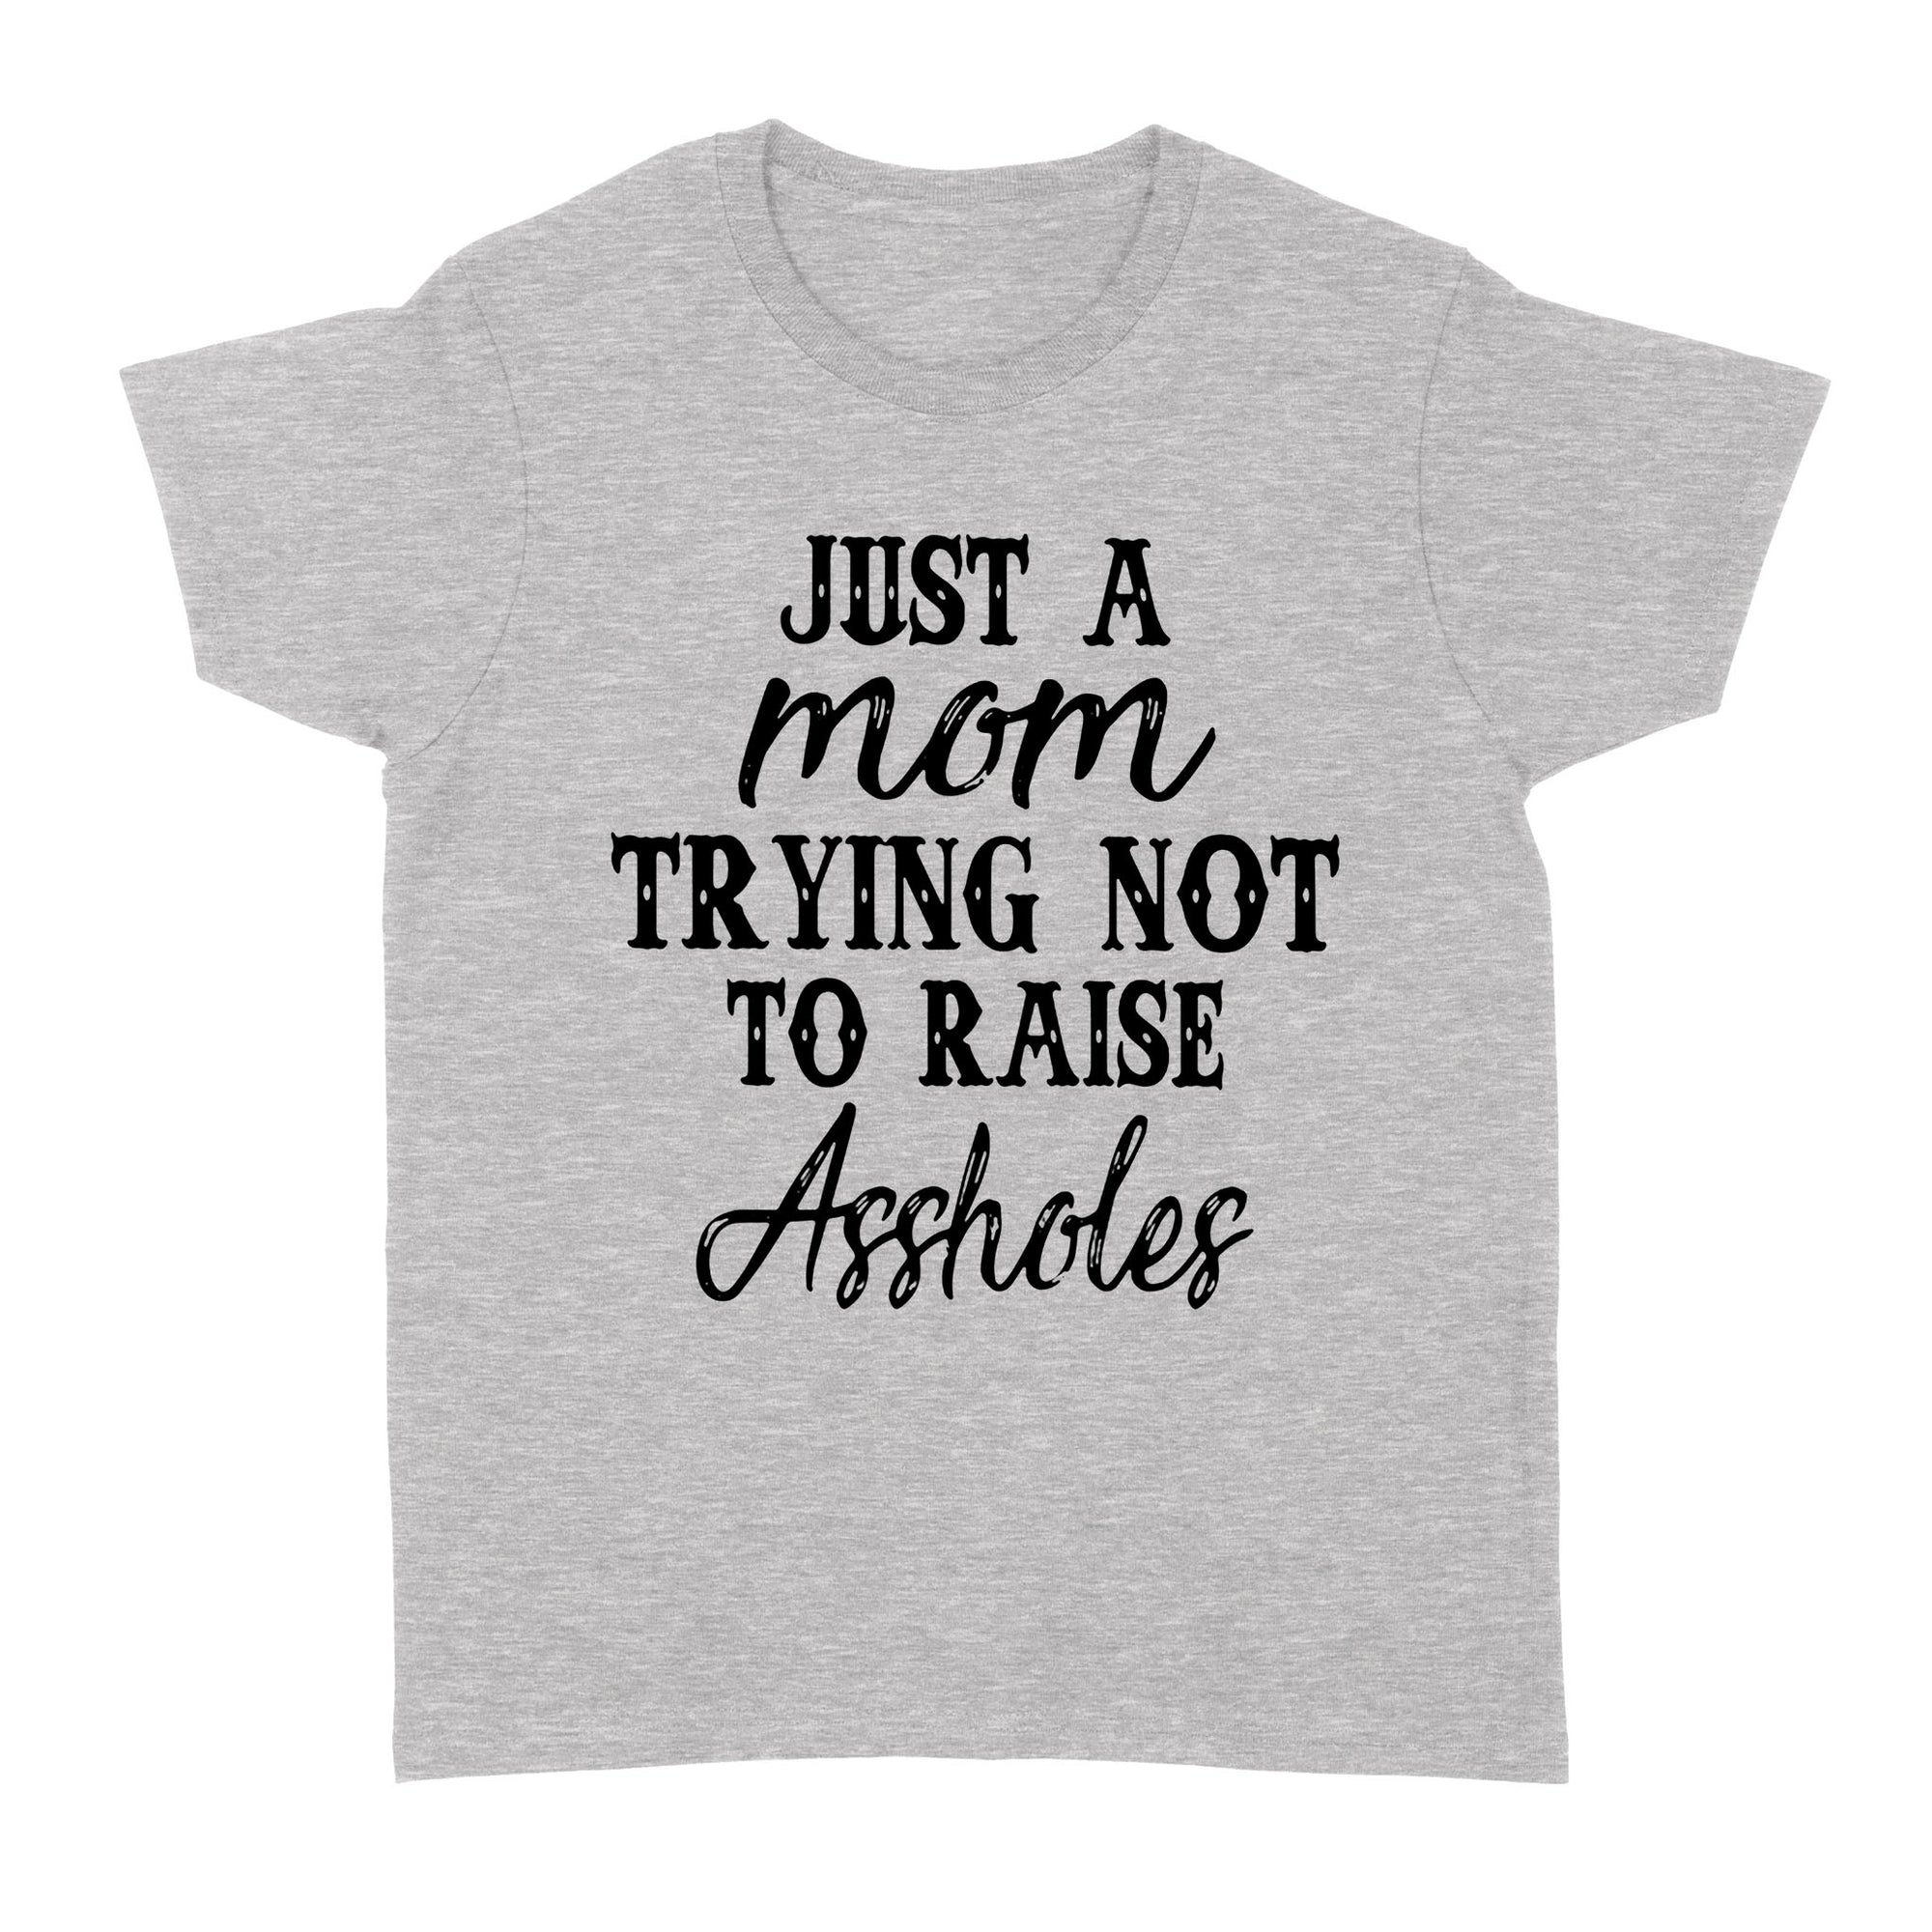 Gift Ideas for Mom Mothers Day Just Mom Trying Not To Raise Assholes - Standard Women's T-shirt